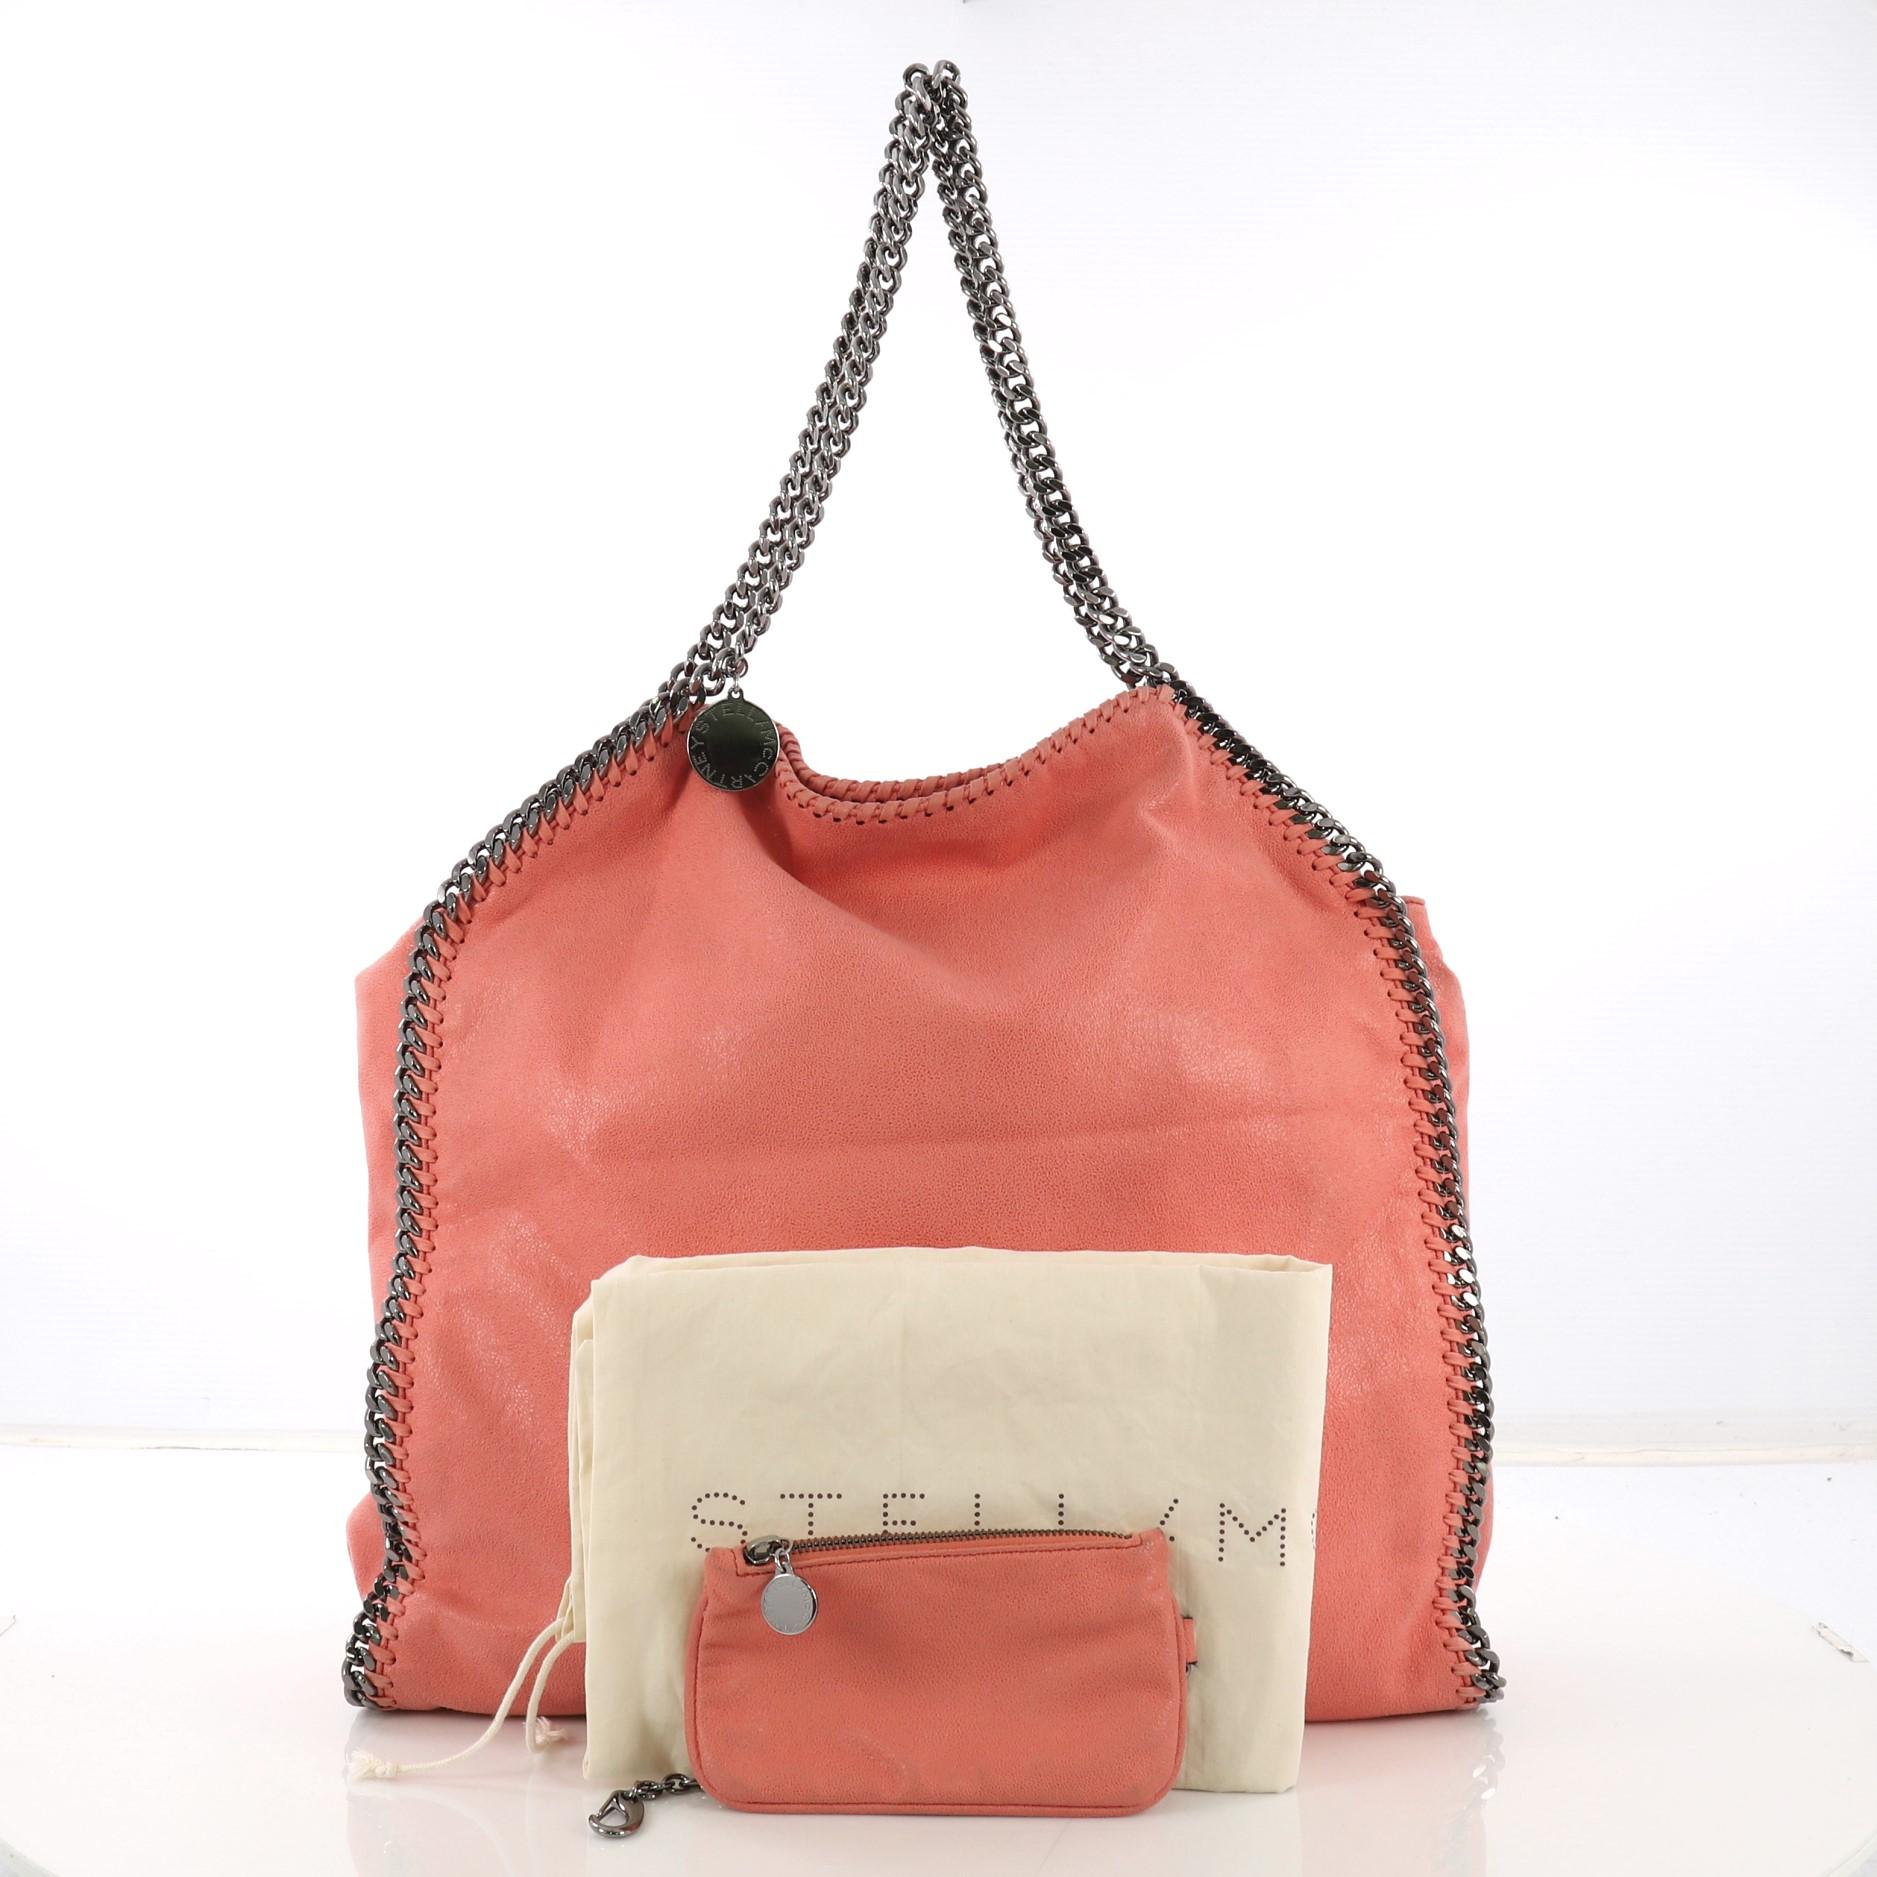 This Stella McCartney Falabella Tote Shaggy Deer Large, crafted from pink shaggy deer, features chain link handles and trim, whipstitched edges, hanging logo disc, and gunmetal-tone hardware. Its magnetic snap closure opens to a pink fabric interior